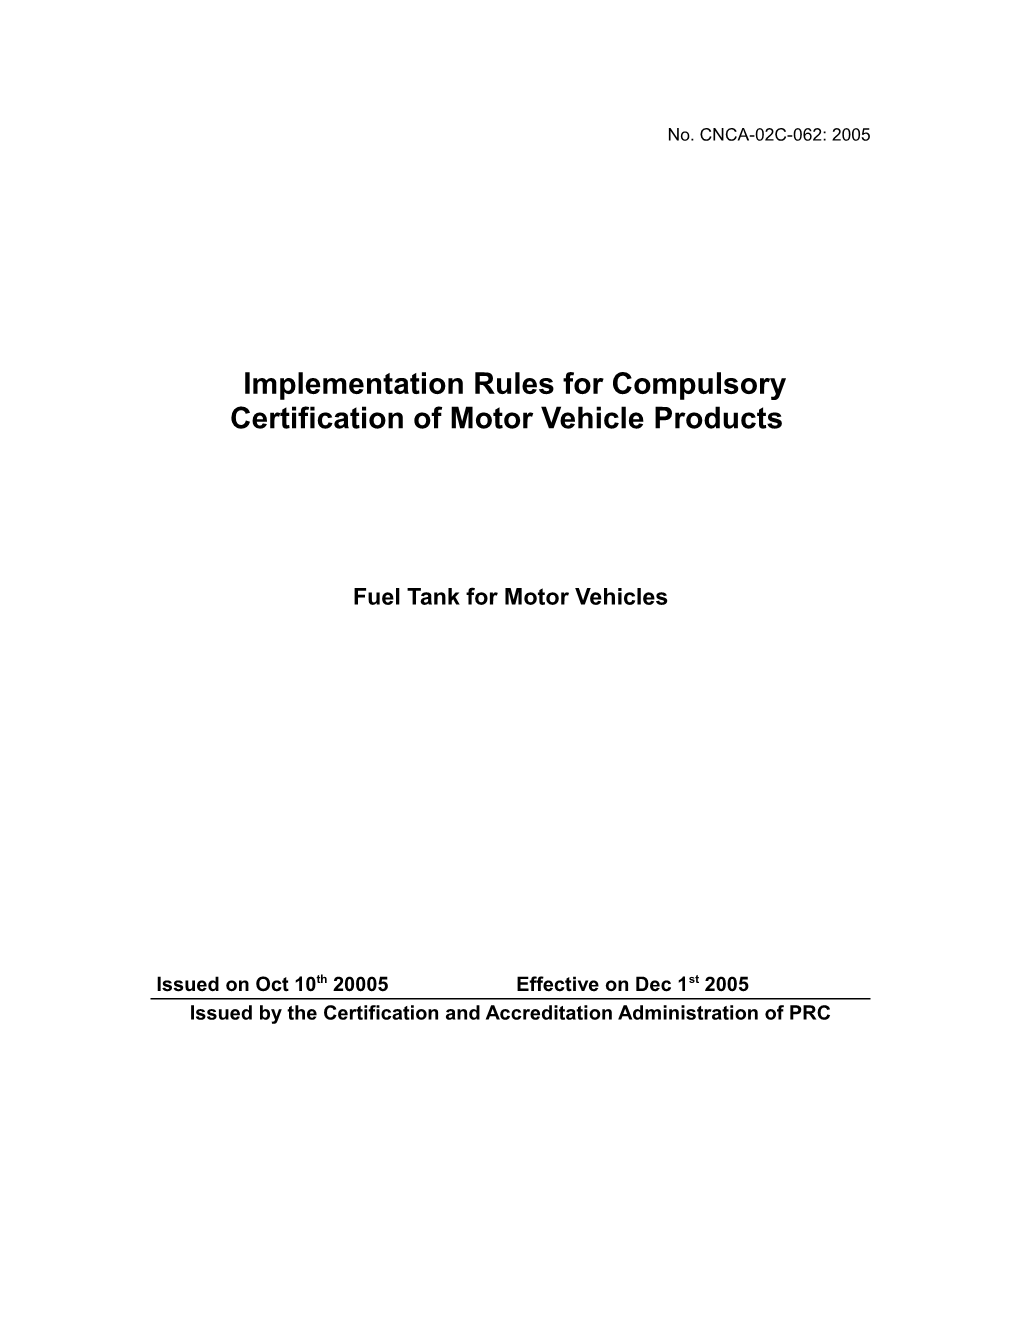 Implementation Rules for Compulsory Certification of Motor Vehicleproducts